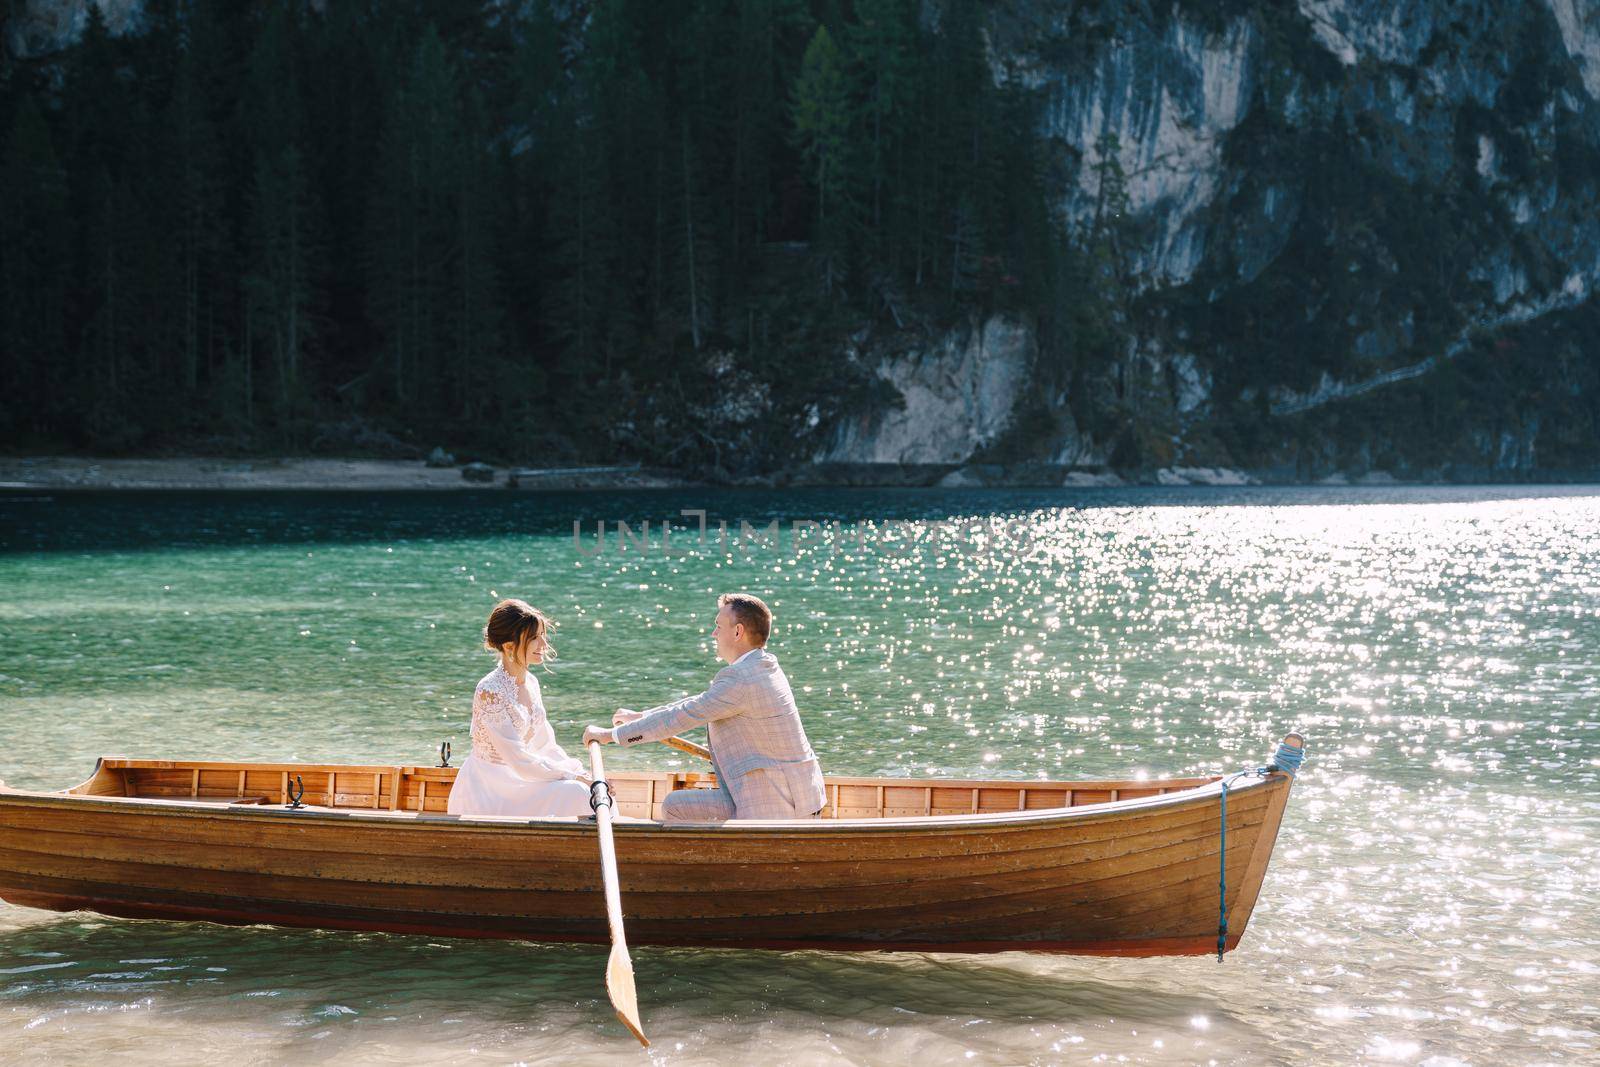 Newlyweds sail in a wooden boat on the Lago di Braies in Italy. Wedding in Europe, on Braies lake. Wedding couple - The groom rows with wooden oars, the bride sits opposite. by Nadtochiy